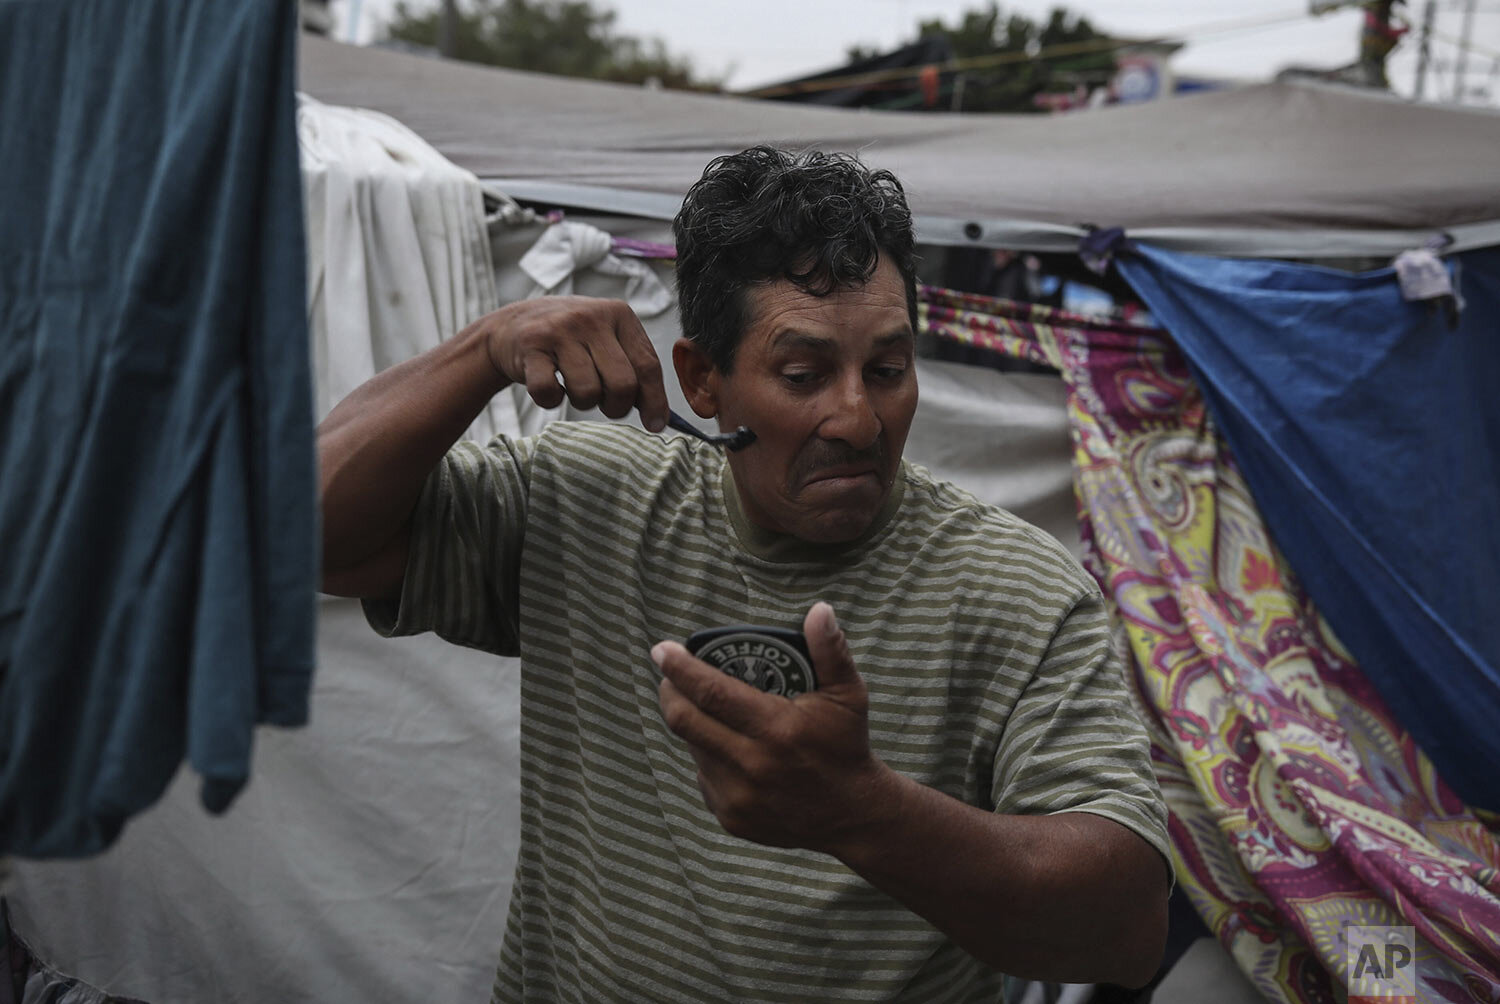  Honduran migrant Christian Fragoso shaves at a migrant camp near El Chaparral pedestrian border bridge in Tijuana, Mexico, Friday, July 2, 2021. The migrant camp of about 2,000 asylum-seekers, mostly families, blocks a pedestrian entrance to the US 